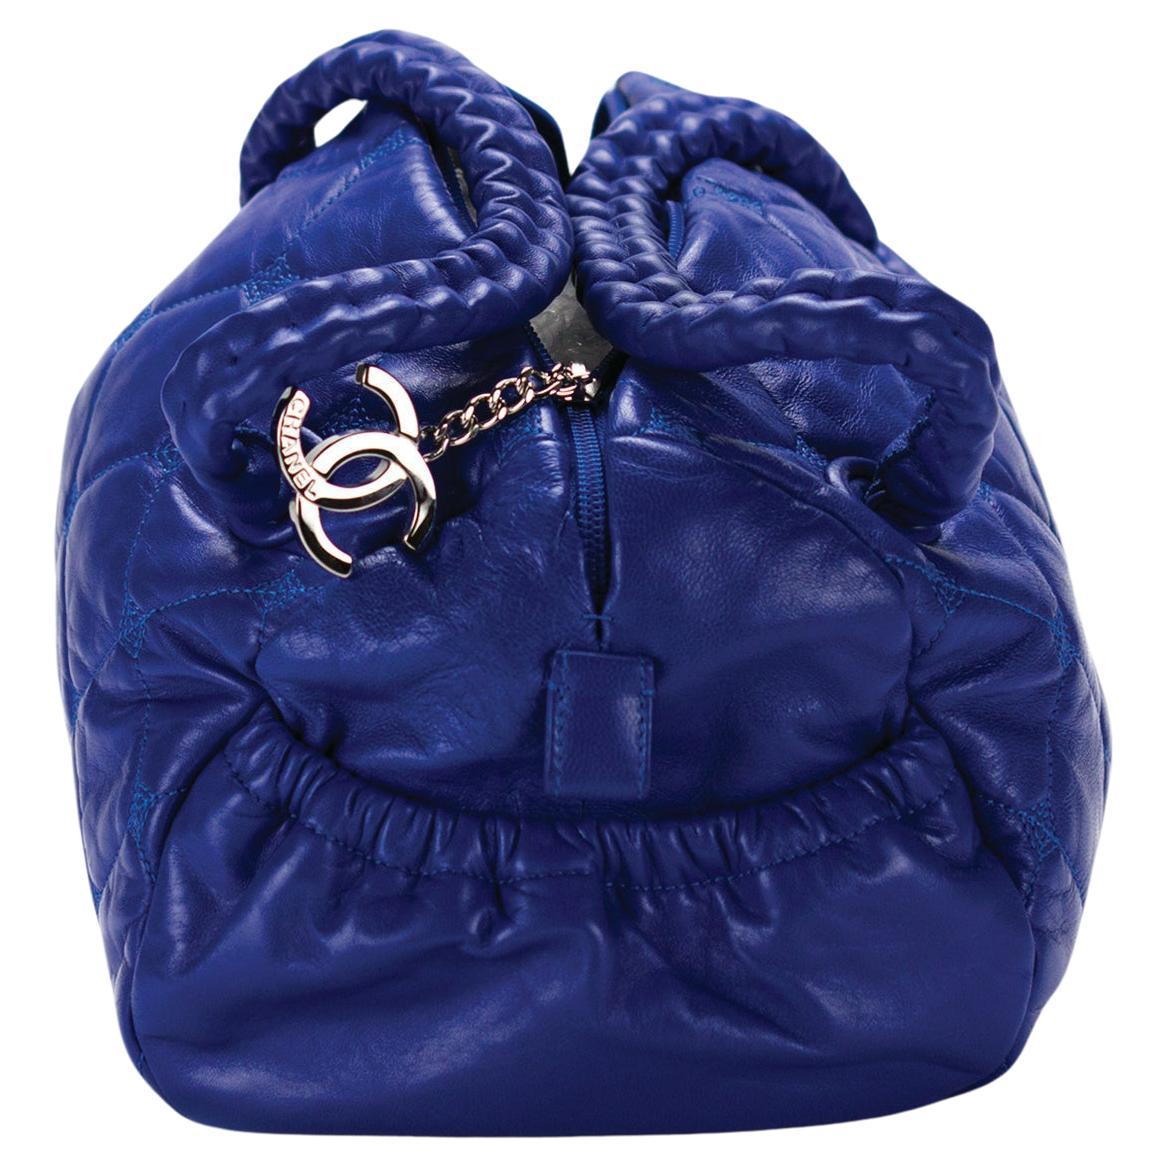 Chanel 2008 Royal Blue Top Handle Small Bowler Tote Stitched Lambskin Bag  en vente 1